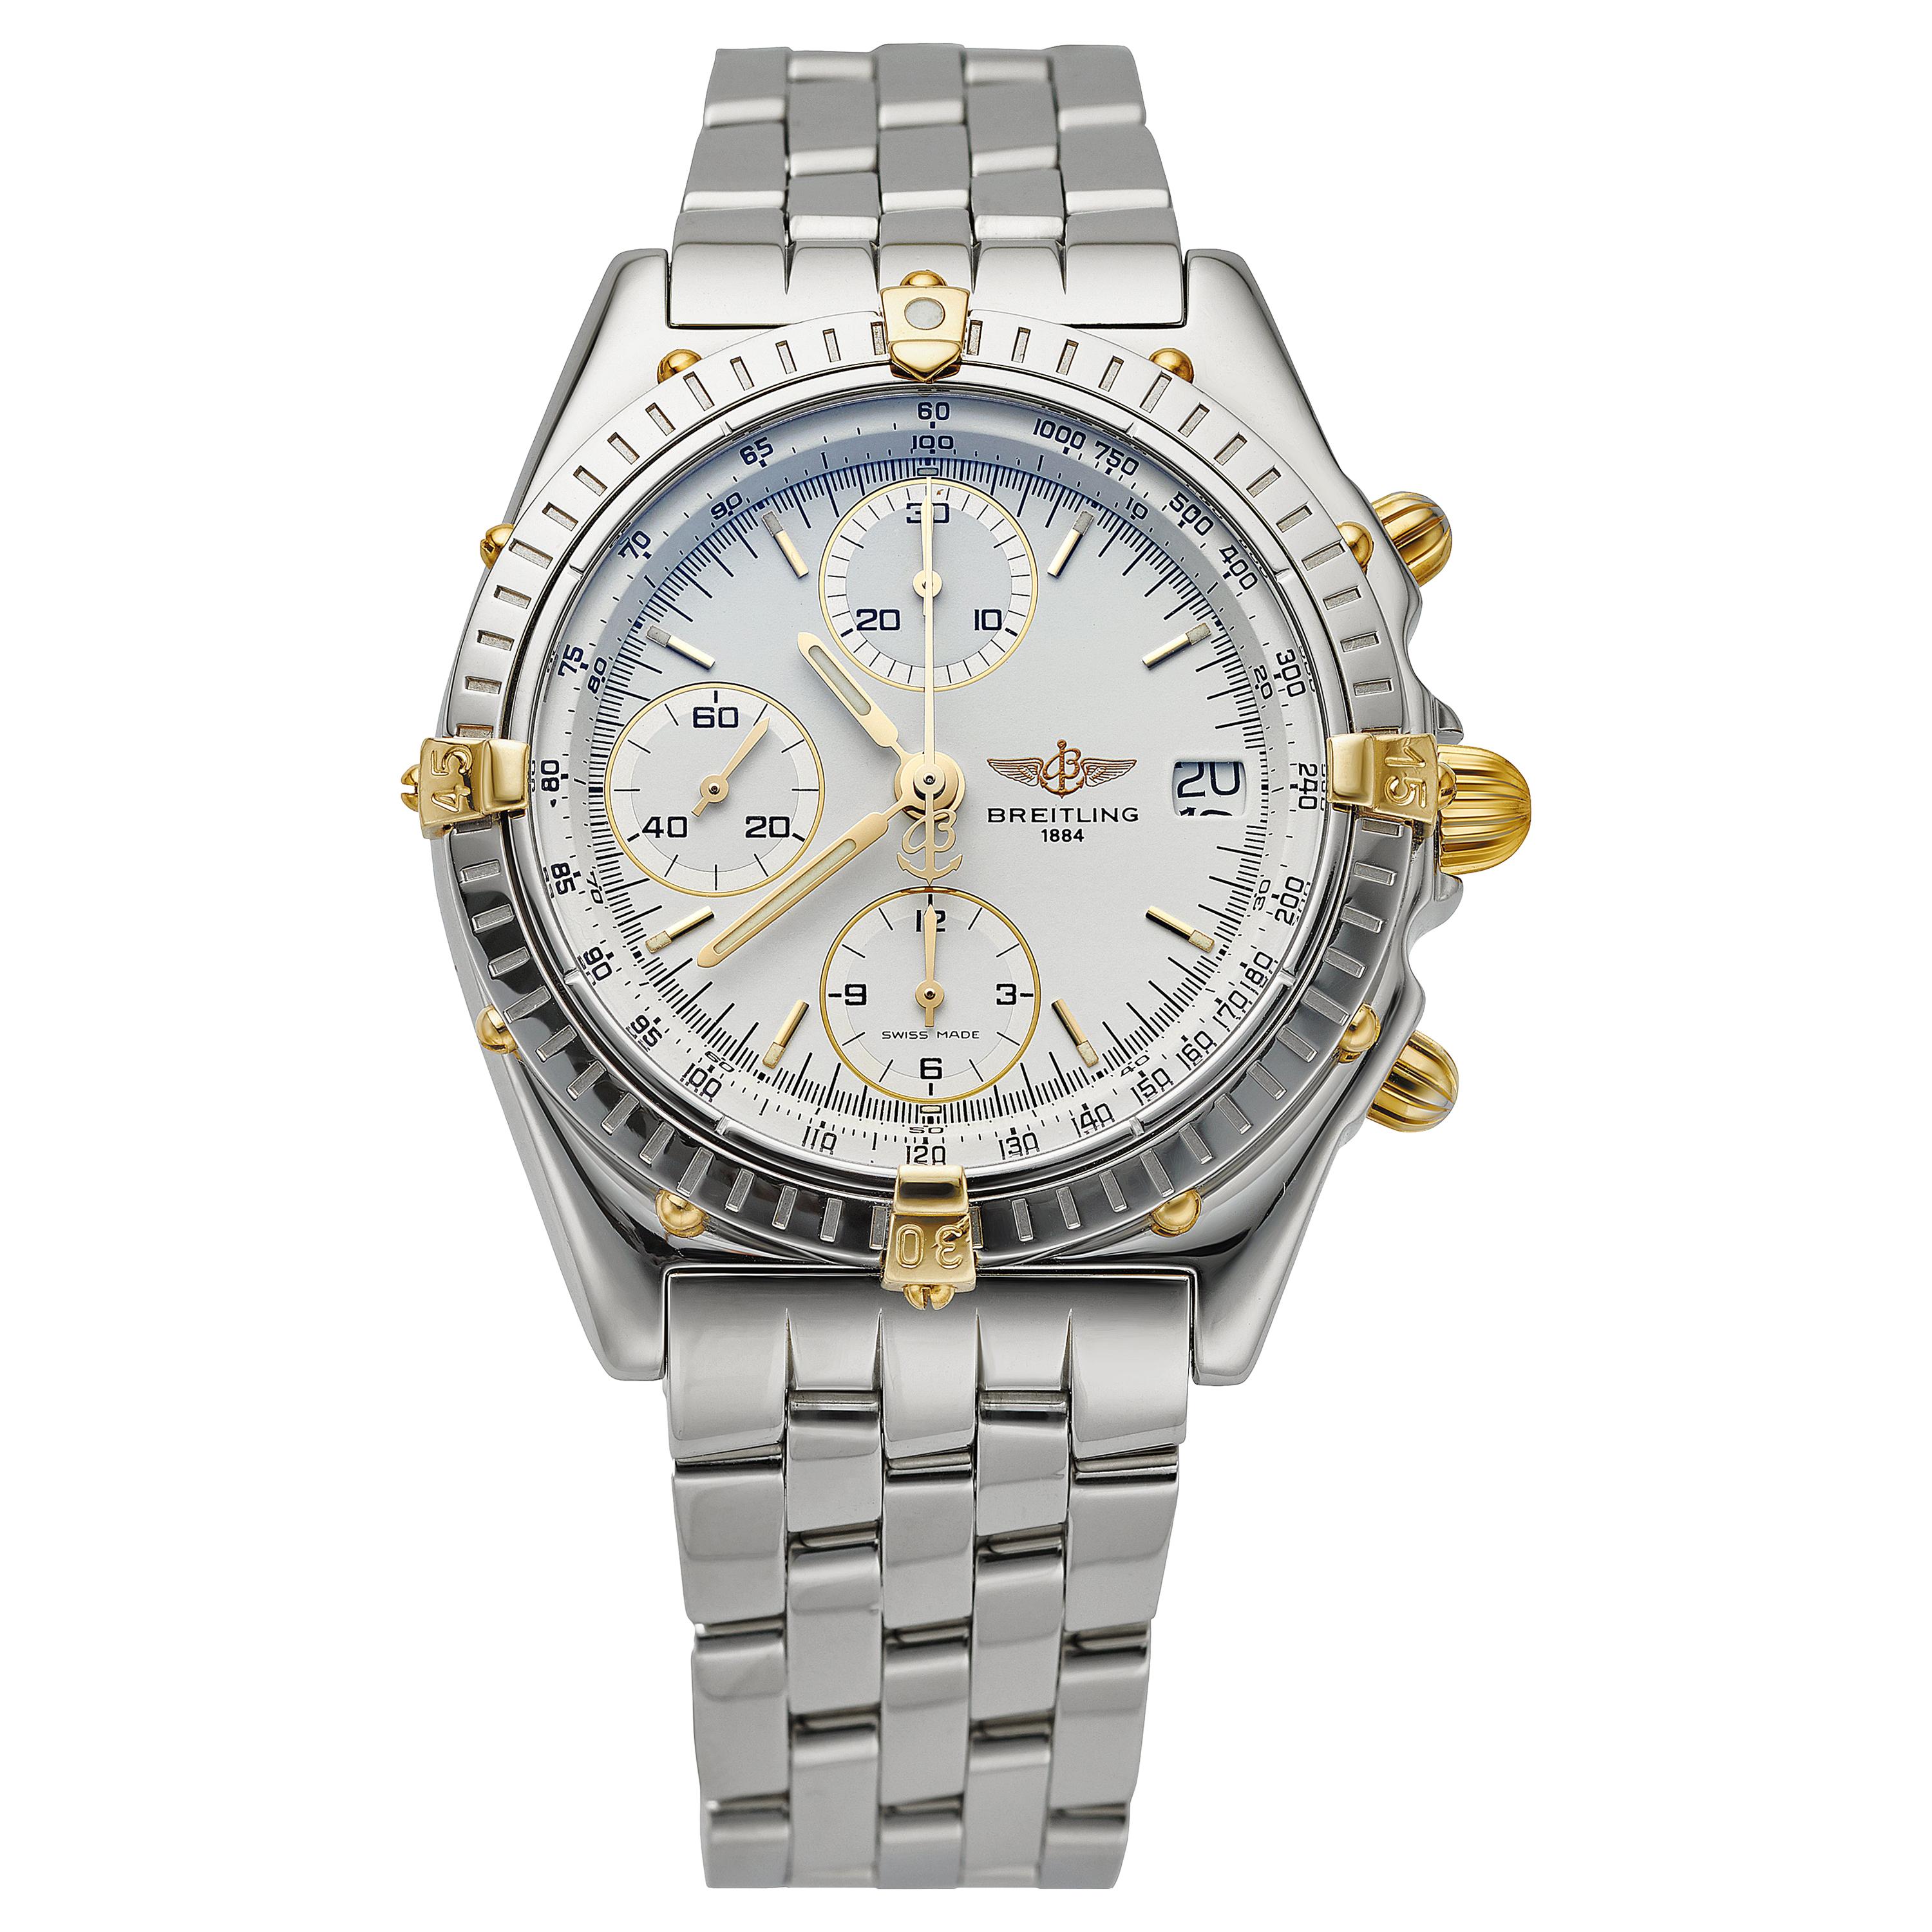 Breitling Chronomat Steel Timepiece #B13048 at 1stDibs | breitling for  bentley motors 13048 price, breitling 13048, breitling for bentley motors  watch 13048 price